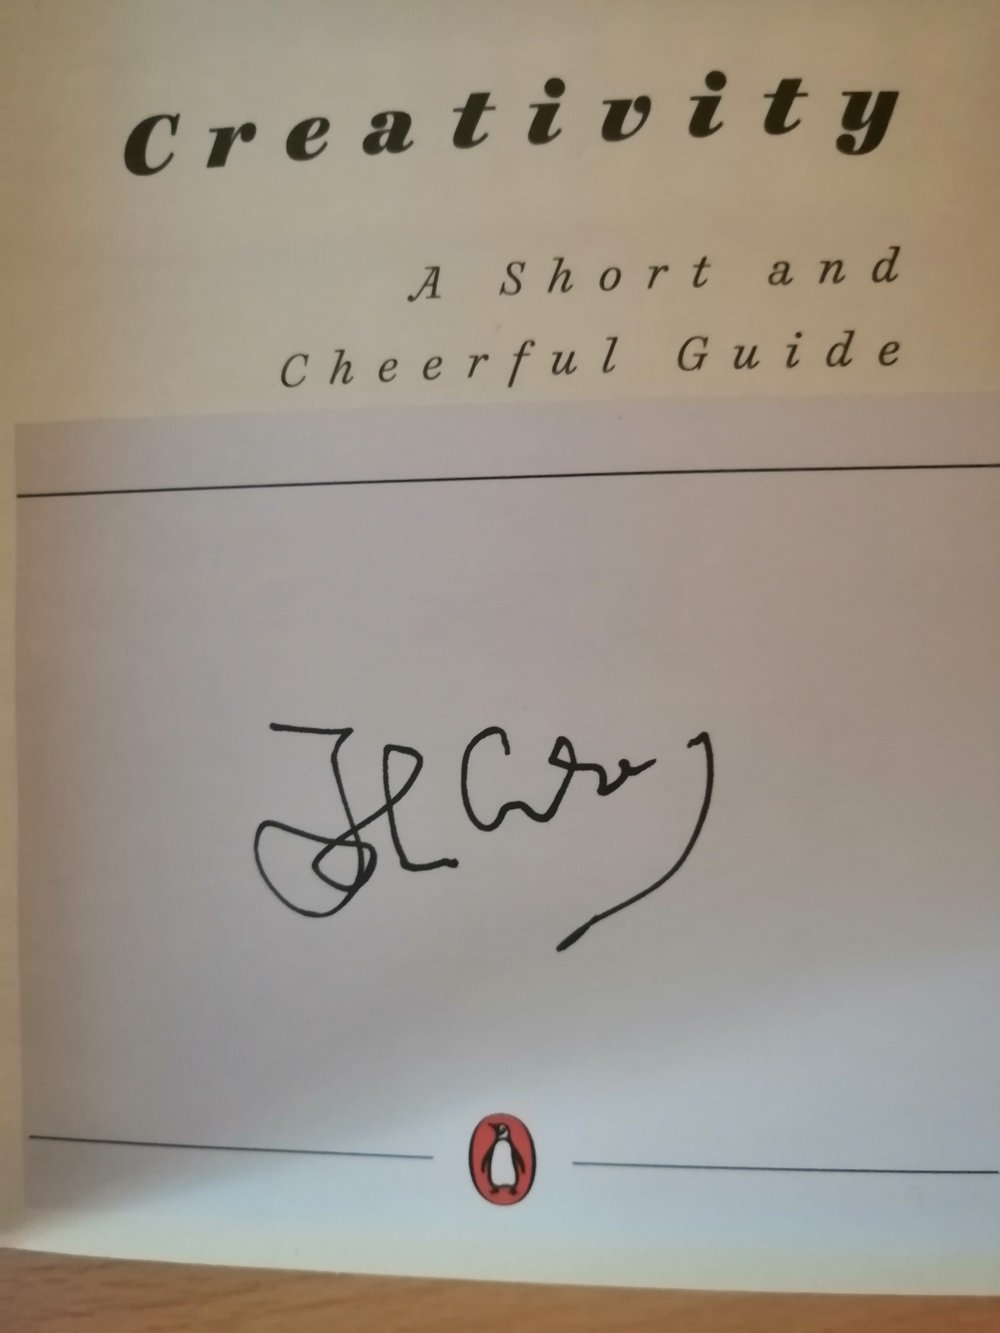 Fawlty Towers John Cleese Signed Book